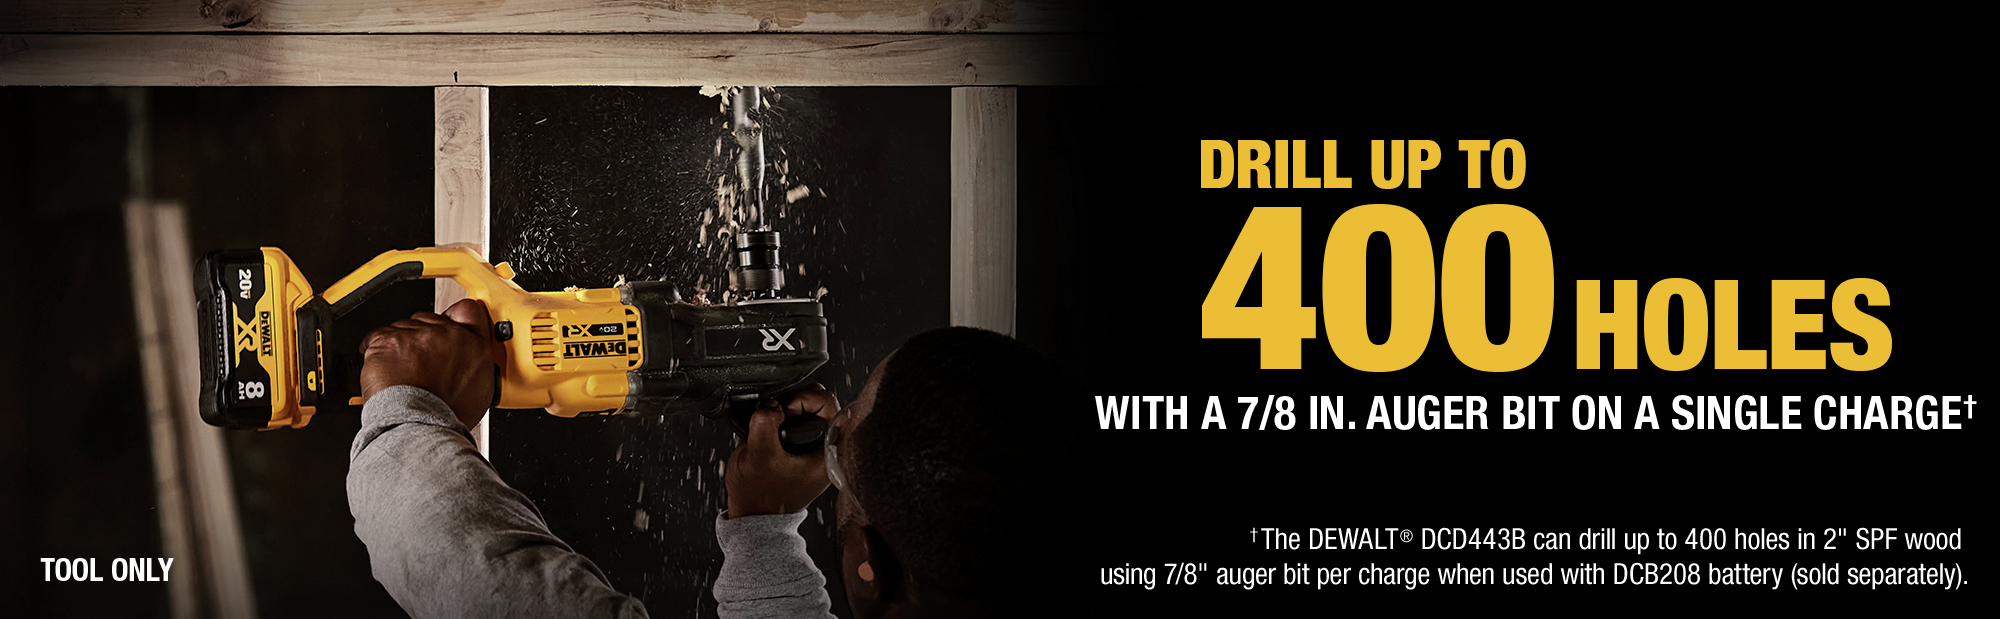 Drill Up to 400 Holes